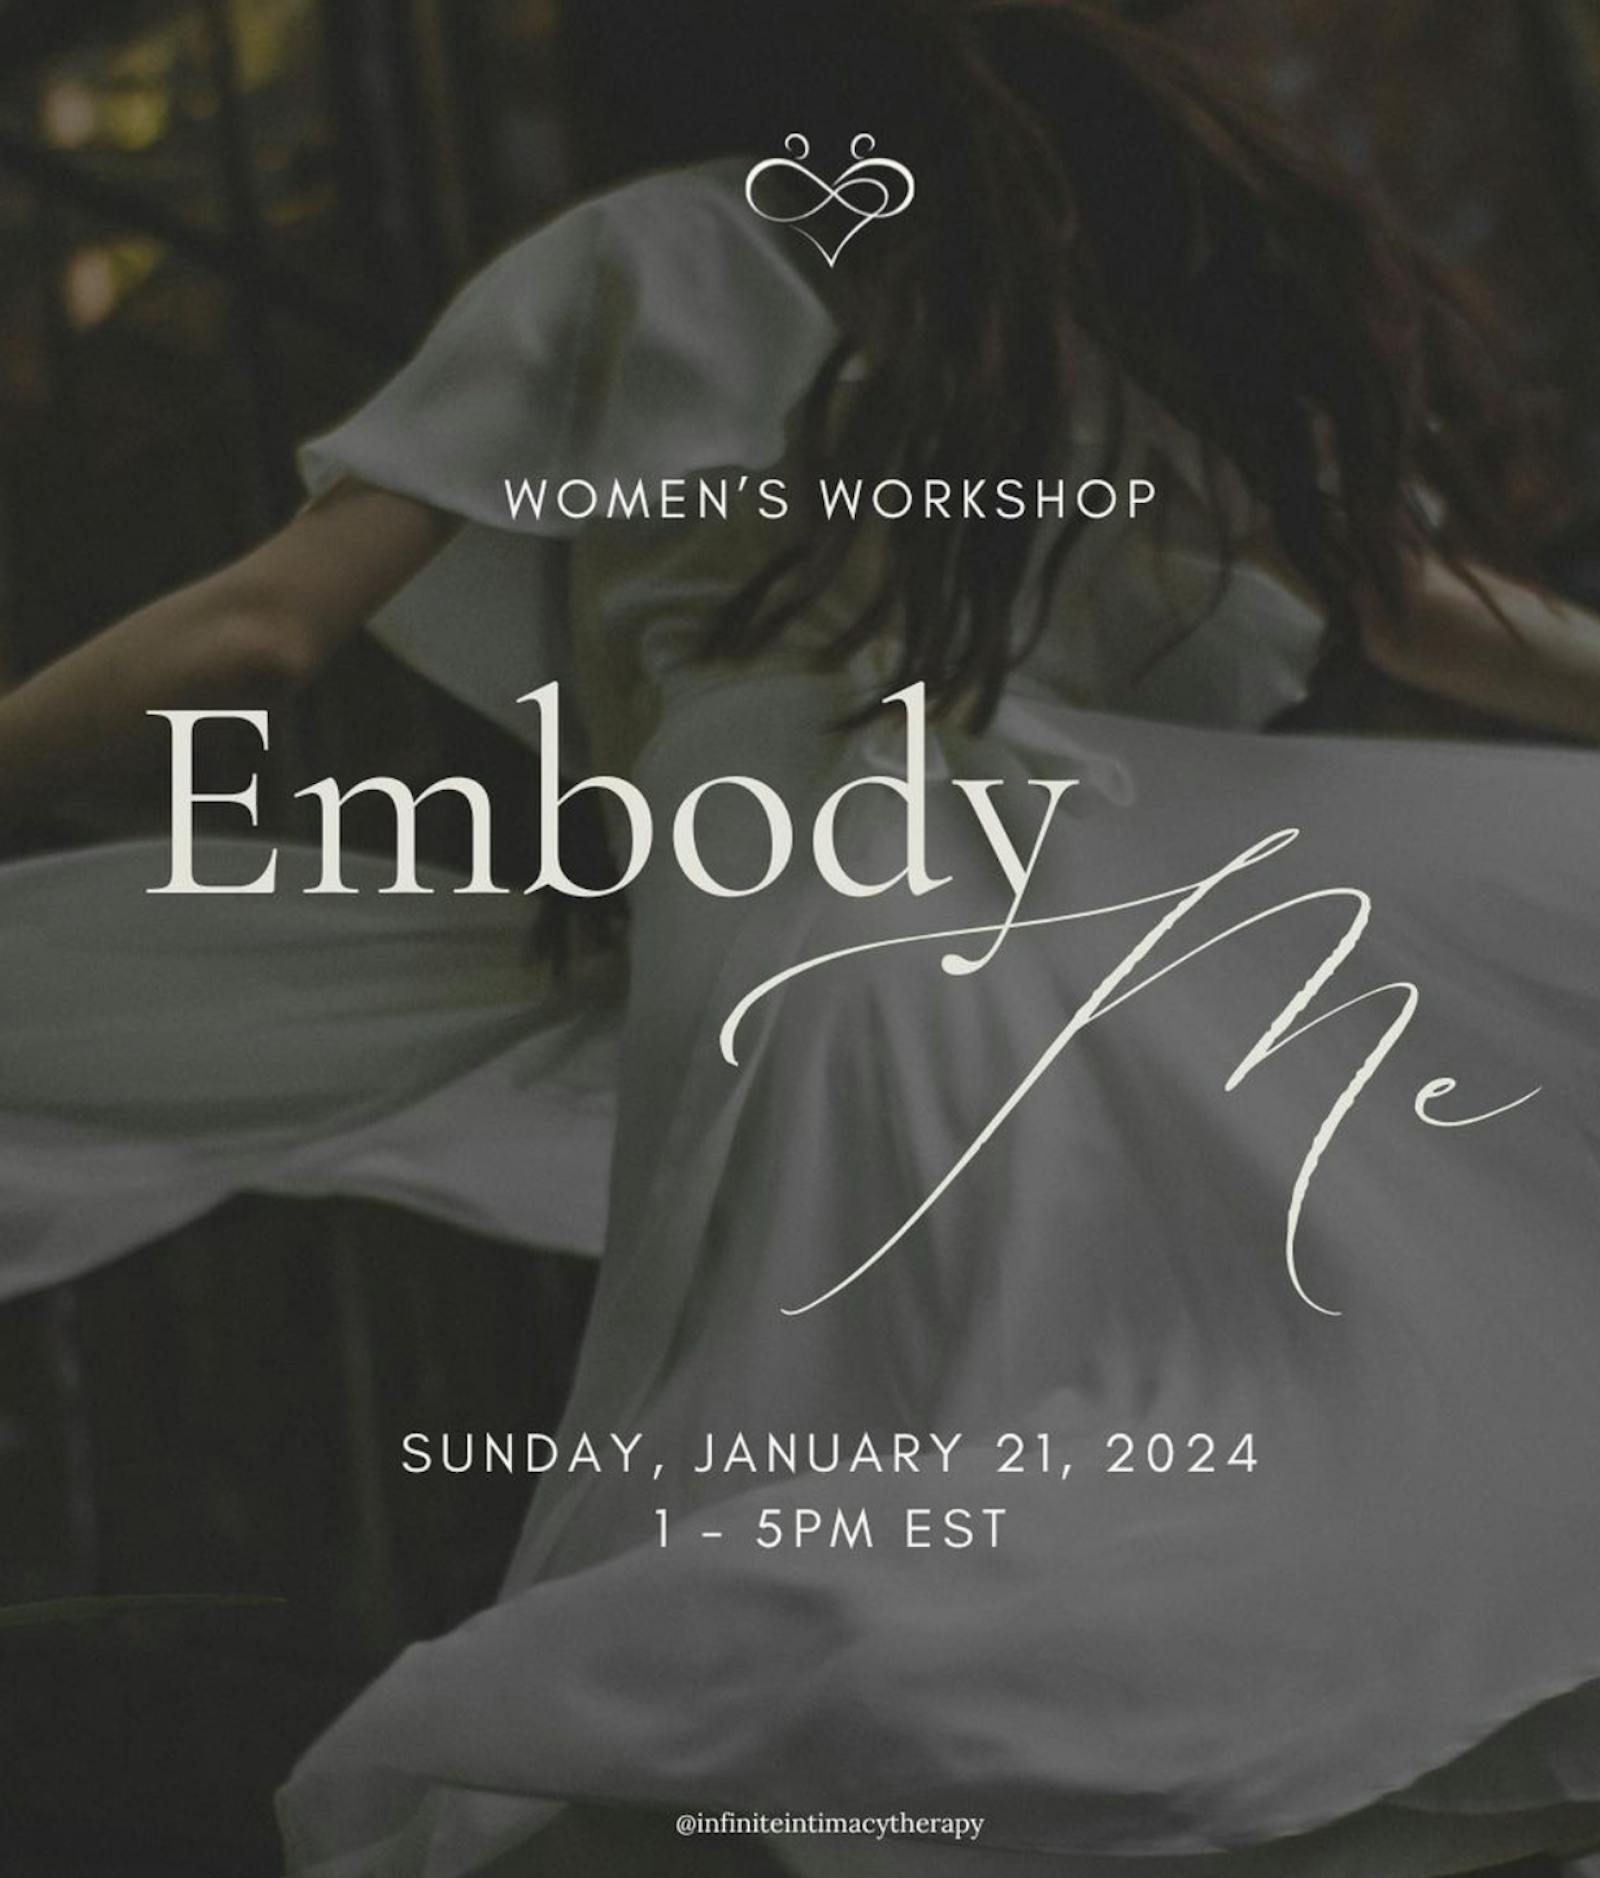 [ 01.21 ] Embody ME - A Woman's Workshop Hosted by Sex Therapist Rachel Smith featuring a Sound Bath by Macielle Betances